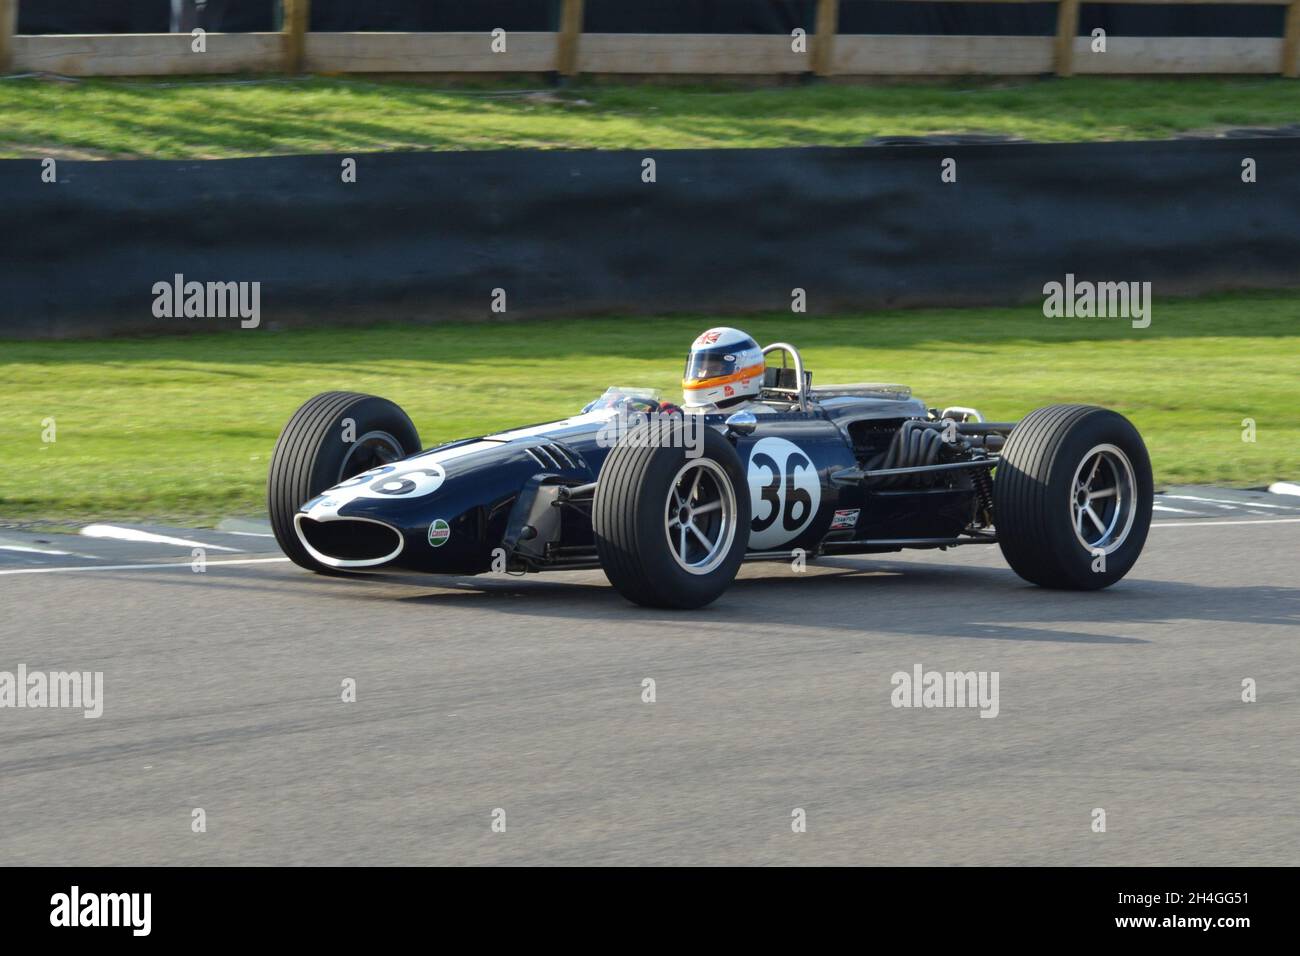 The F1 Gurney Weslake Eagle V12 doing demonstration laps at Goodwood Revival 2018 driven by Derek Bell (pictured) and Sir Jackie Stewart. Stock Photo